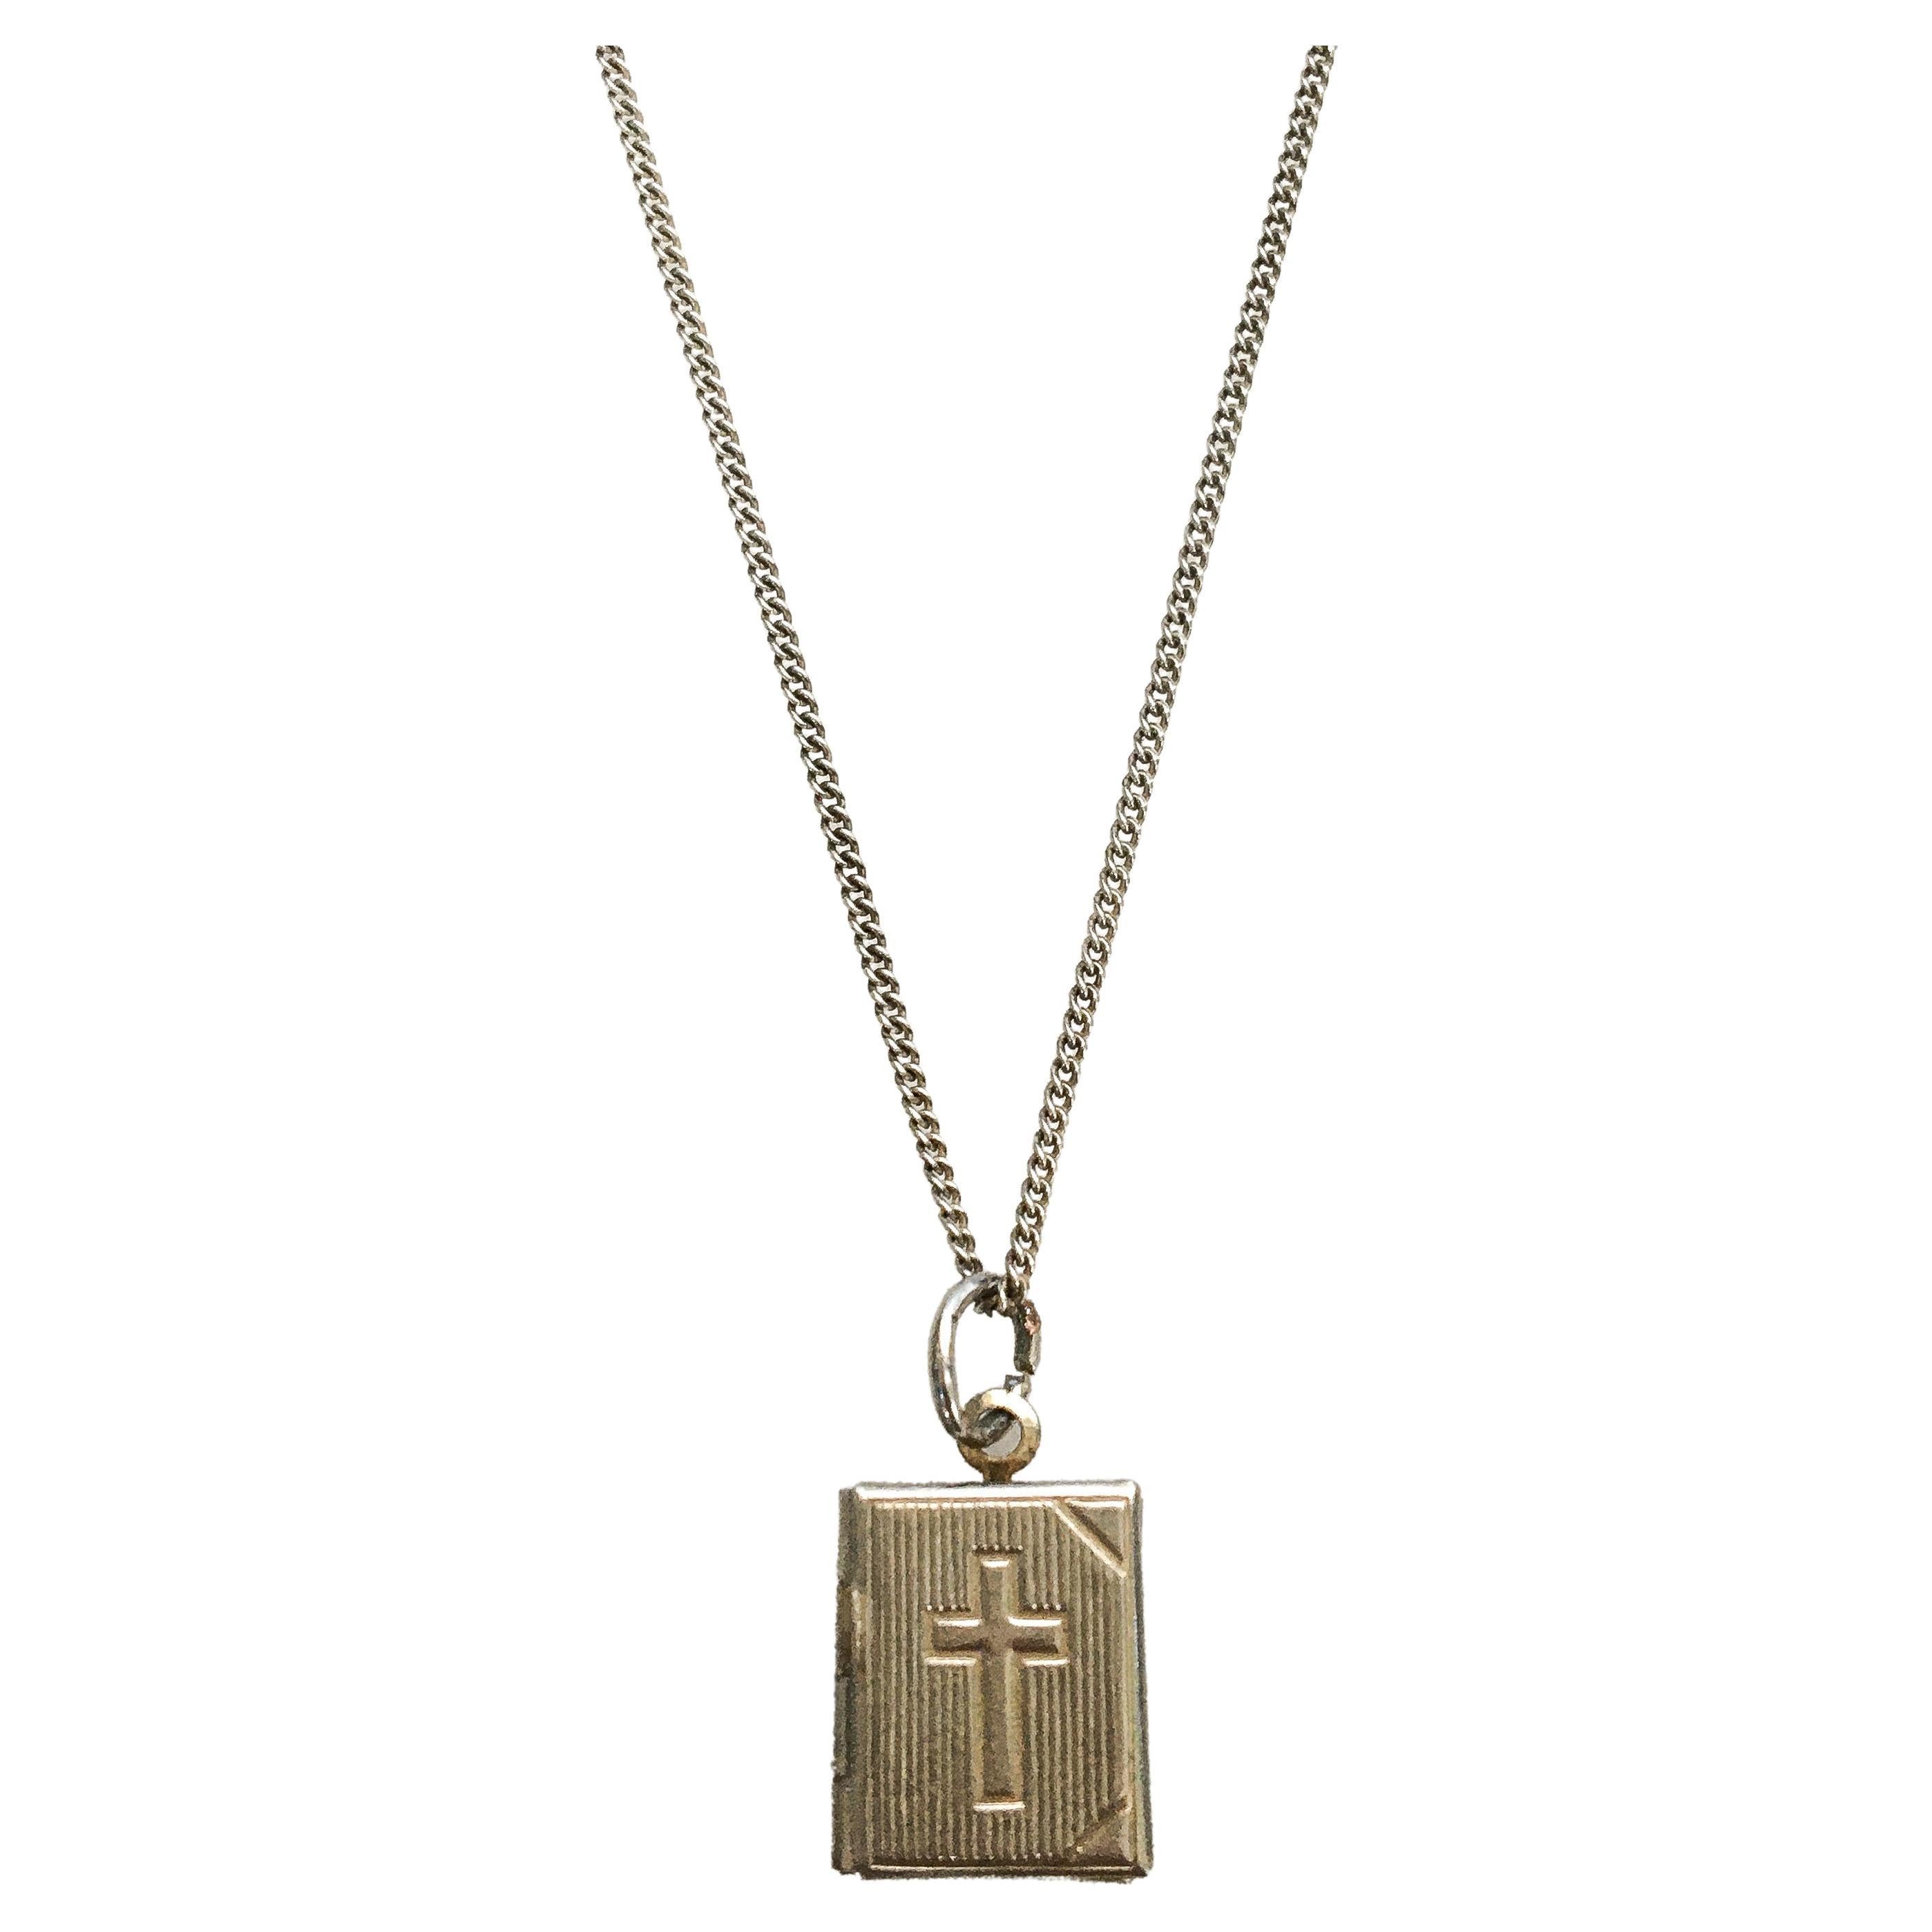 This lovely locket charm pendant is crafted in plated silver. The charm showcases a miniature book with a foxed and faded photo of mother Mary inside. On the front a cross is engraved while the locket itself has vertical engraved lines. The charm